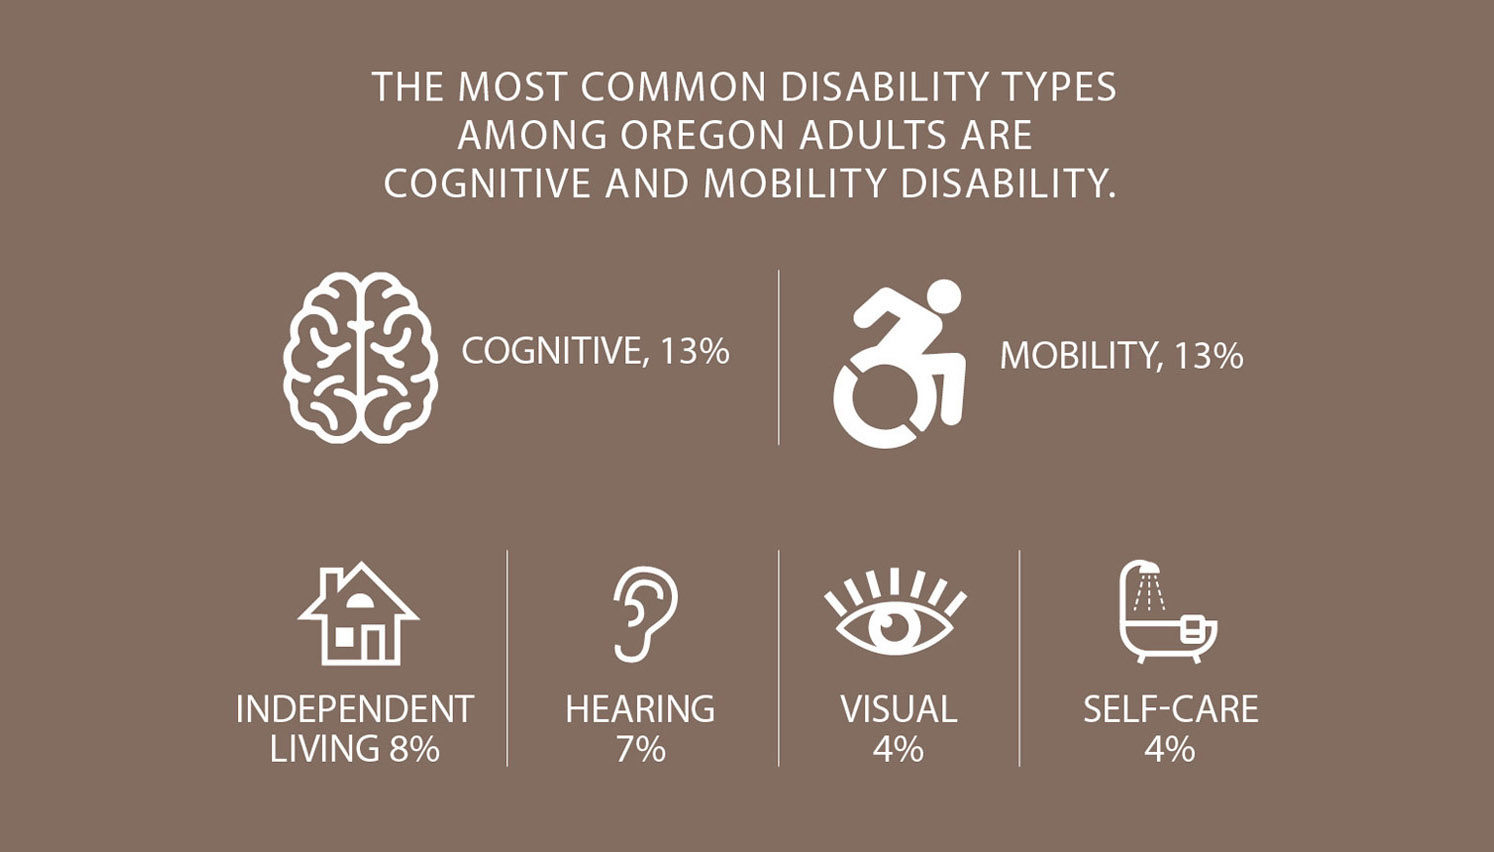 The most common disability types among Oregon adults are cognitive and mobility disability. Cognitive, described by a brain icon, is at 13%. Mobility, described by a person in a wheelchair icon, is at 13%. Independent living described by a house icon, is at 8%. Hearing, described by an ear icon, is at 7%. Visual, described by an icon of an eye, is at 4%. Self-care, described by an icon of a bathtub/shower, is at 4%.